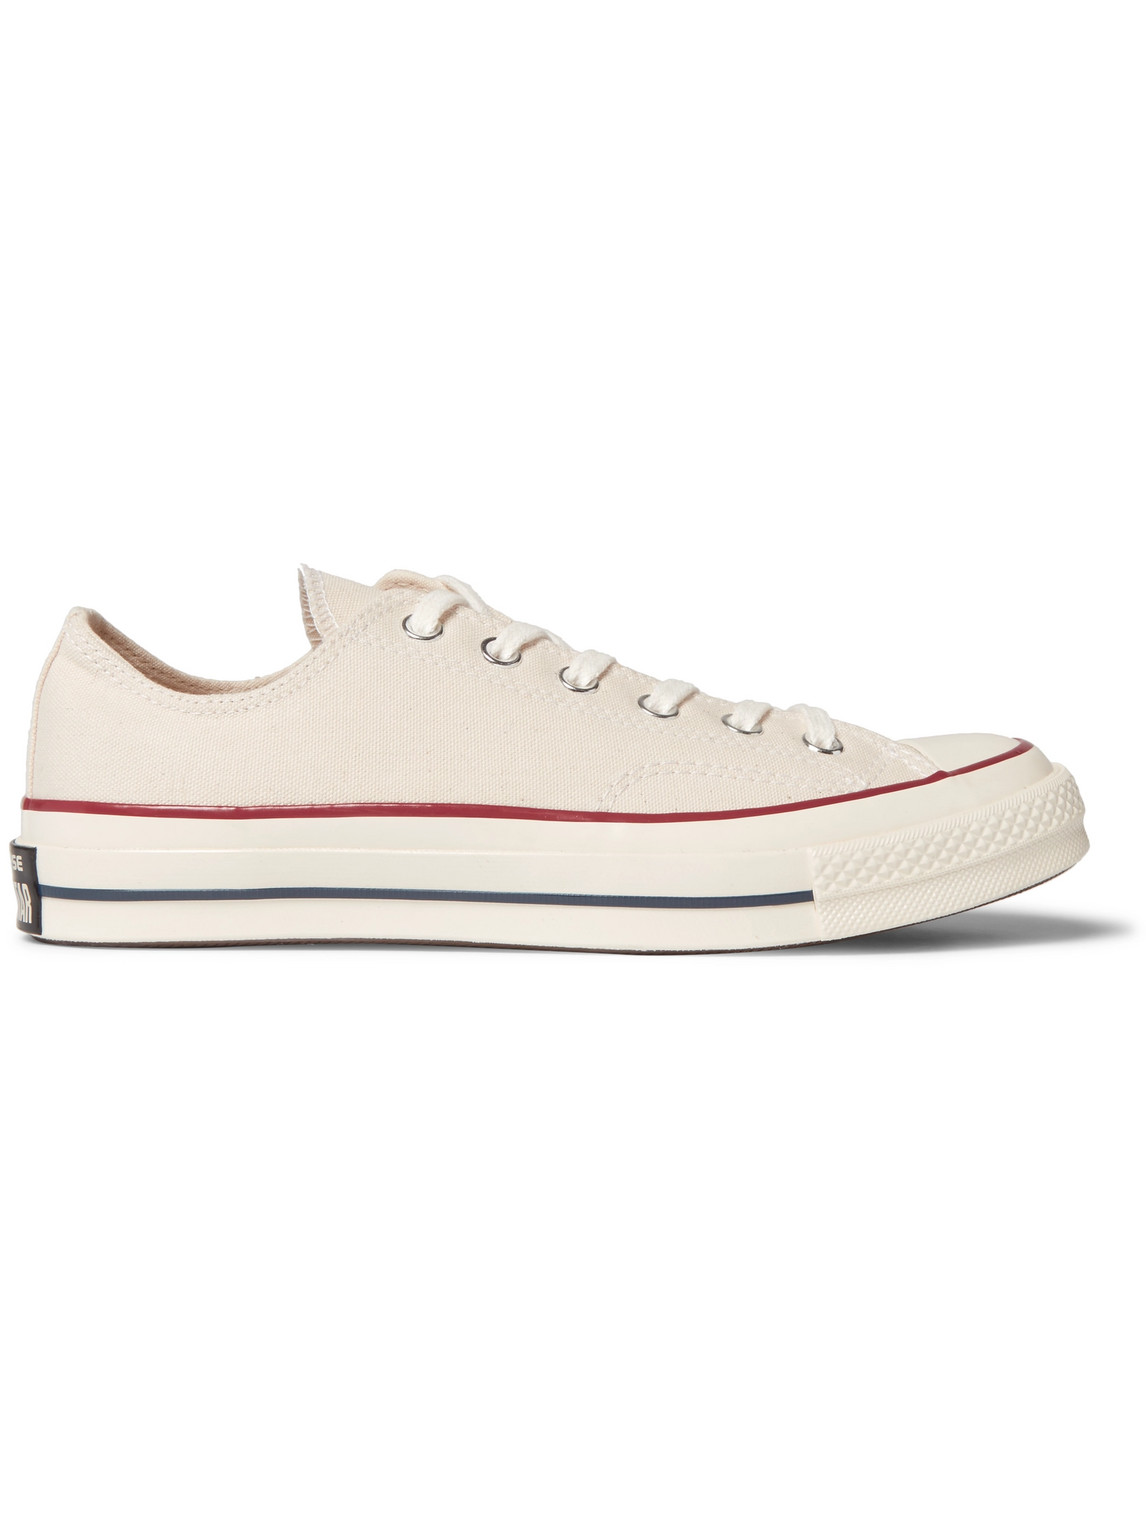 1970s Chuck Taylor All Star Canvas Sneakers